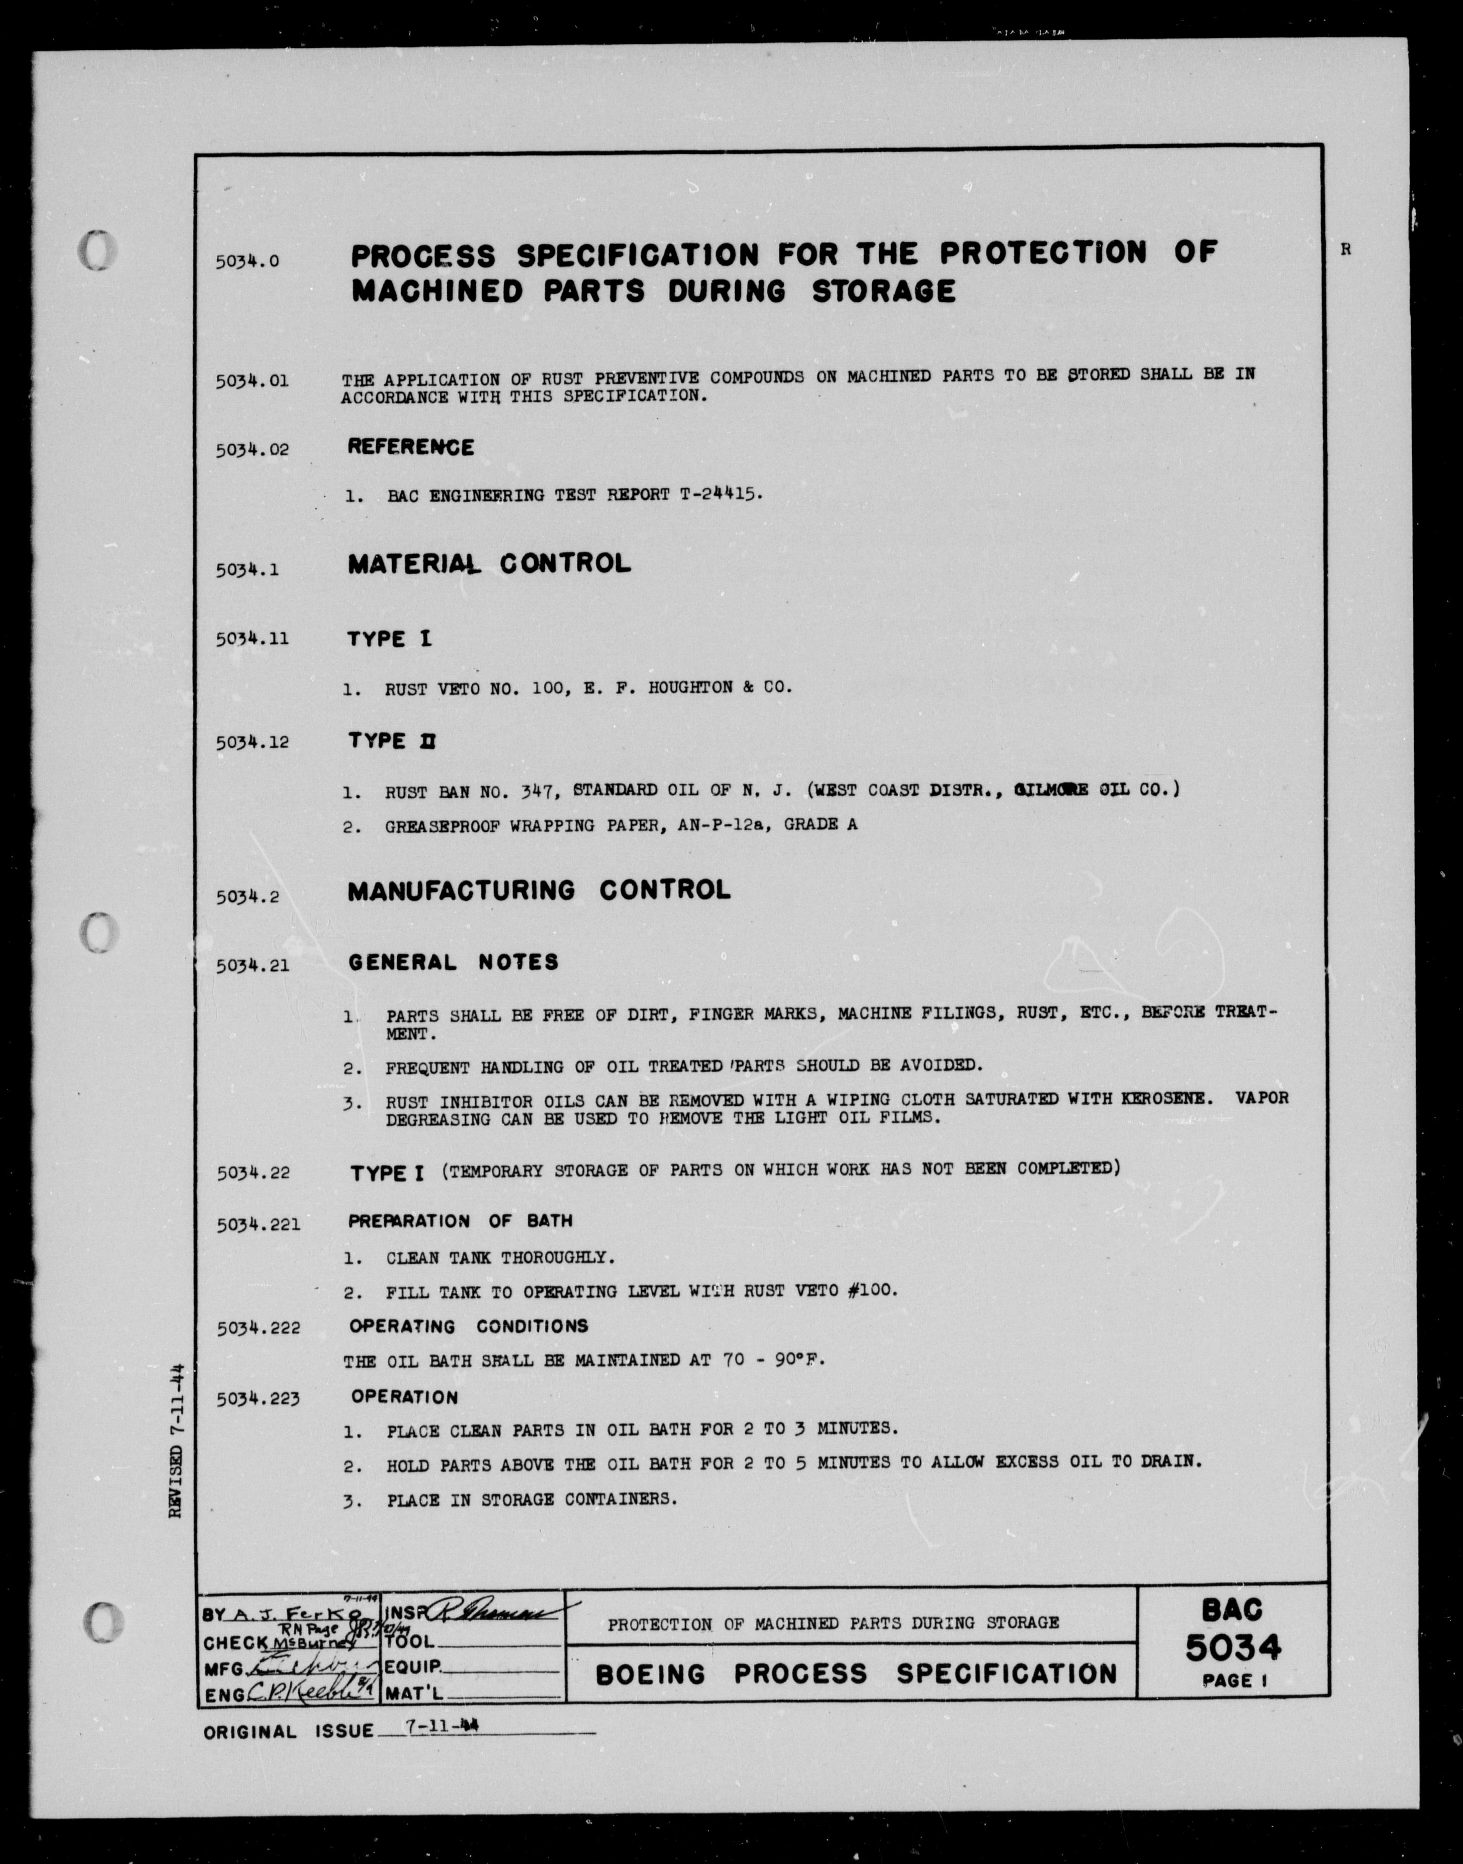 Sample page 1 from AirCorps Library document: Protection of Machined Parts During Storage